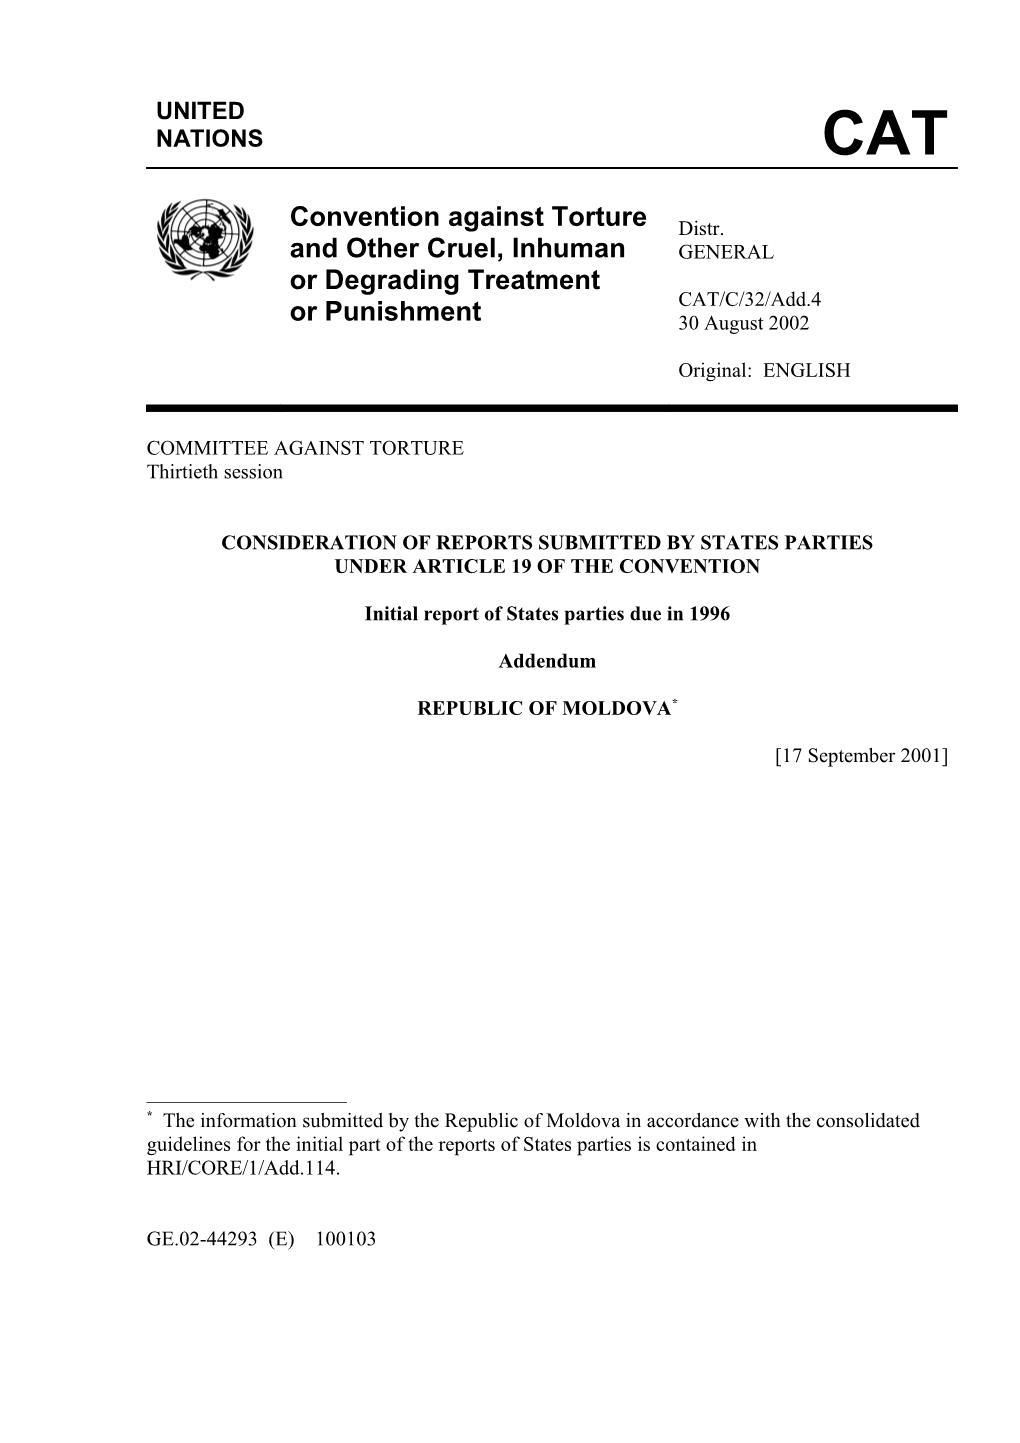 Consideration of Reports Submitted by States Parties s2